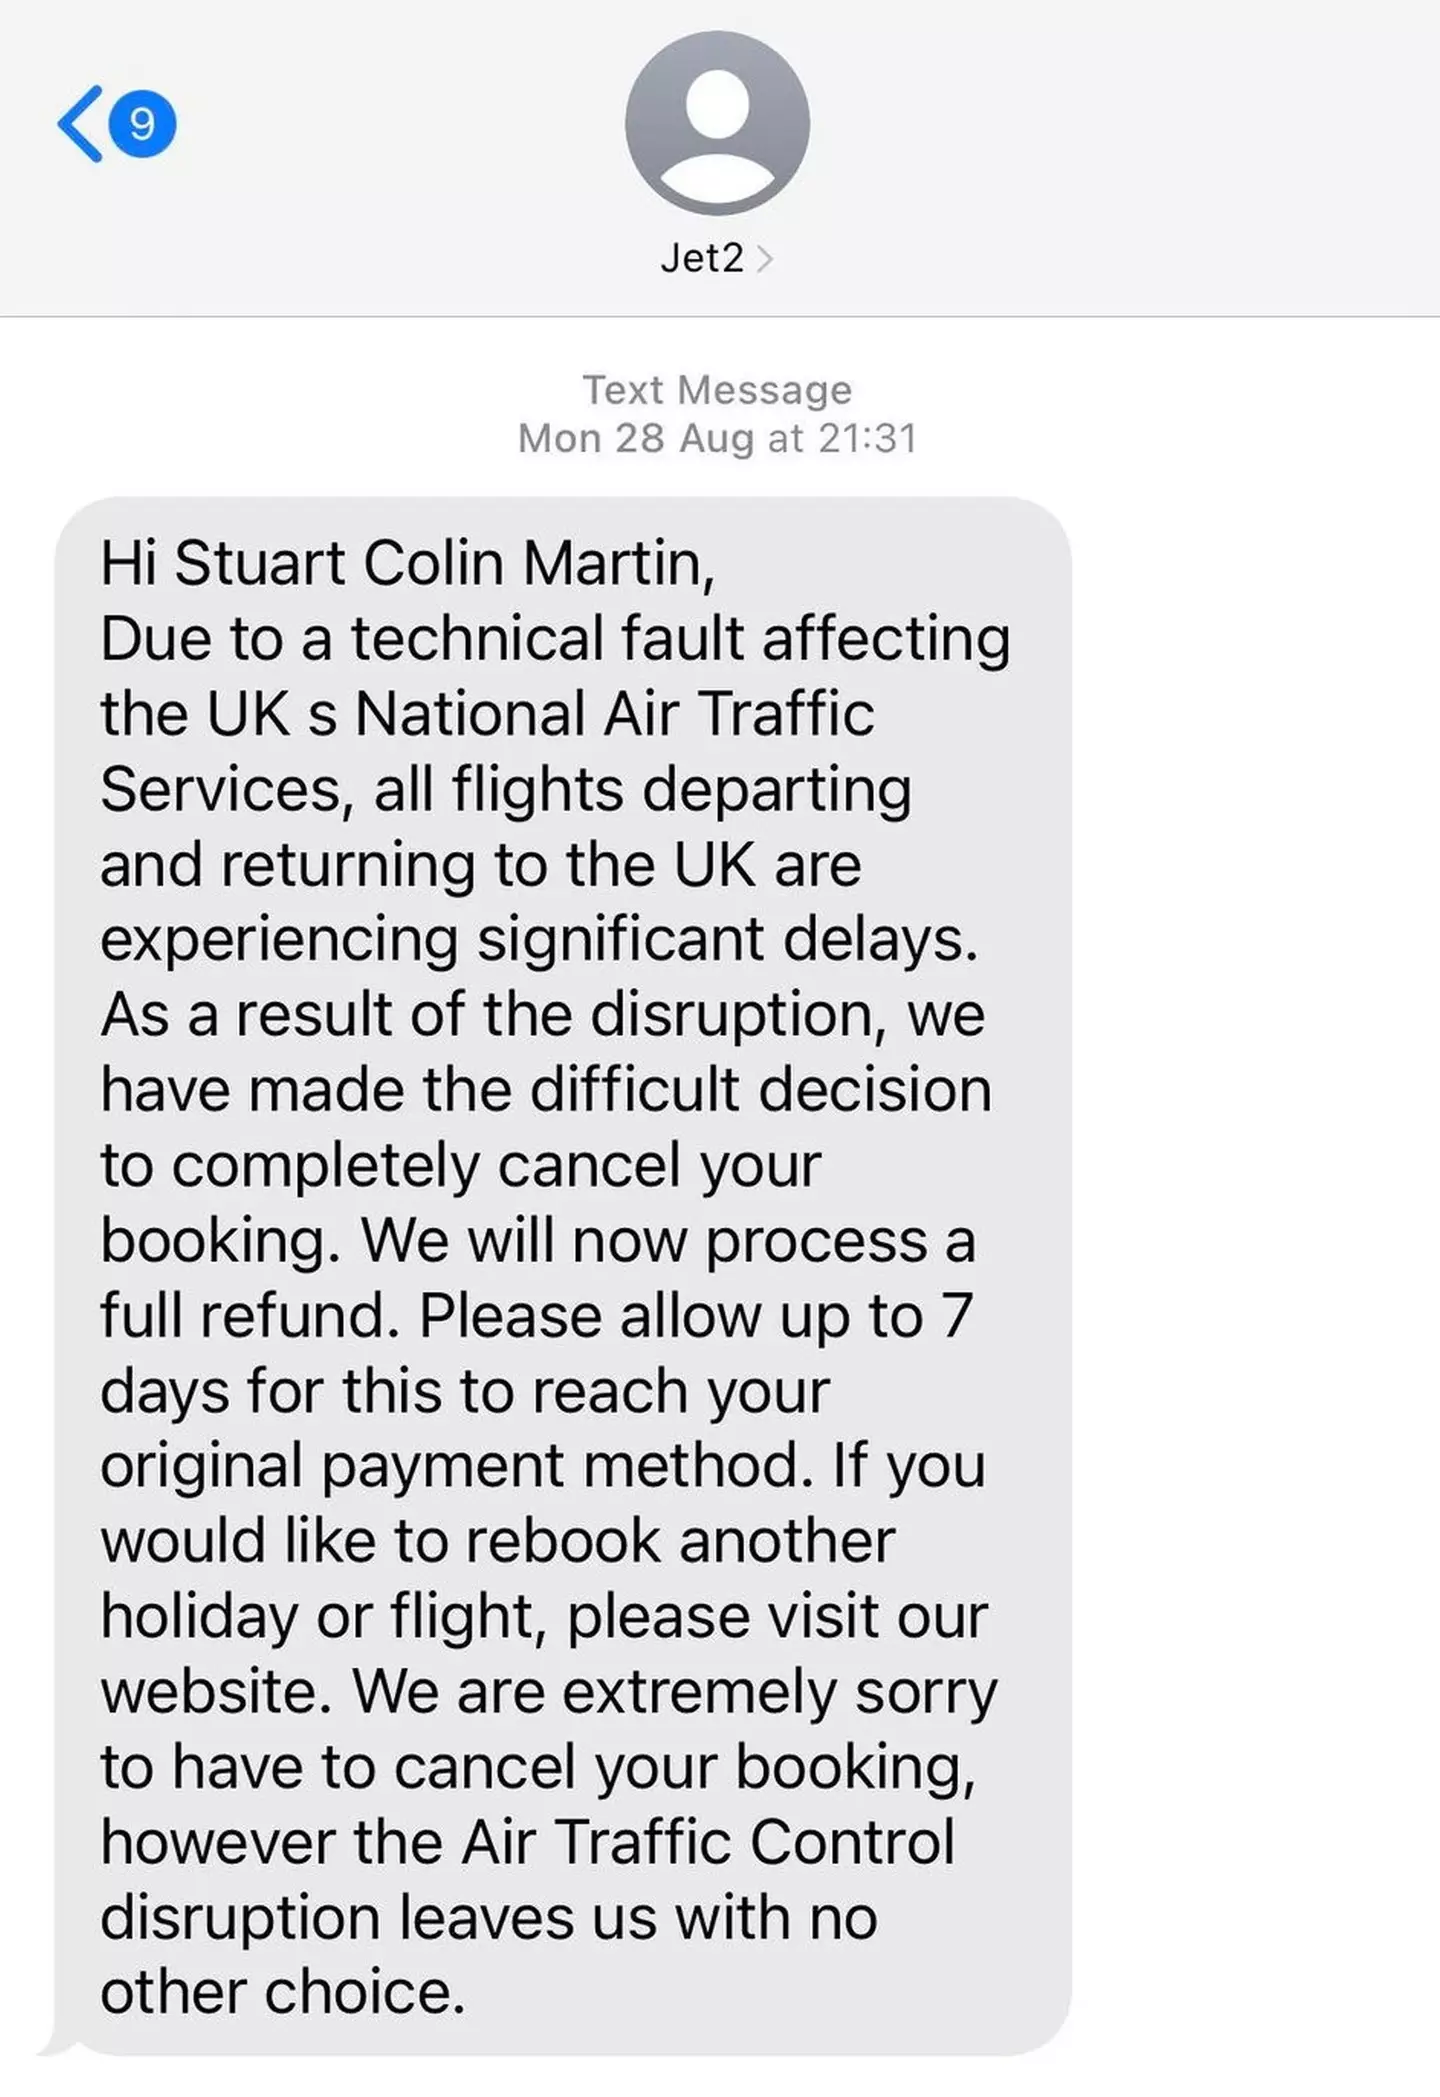 Jet2 has since apologised to the disappointed couple.